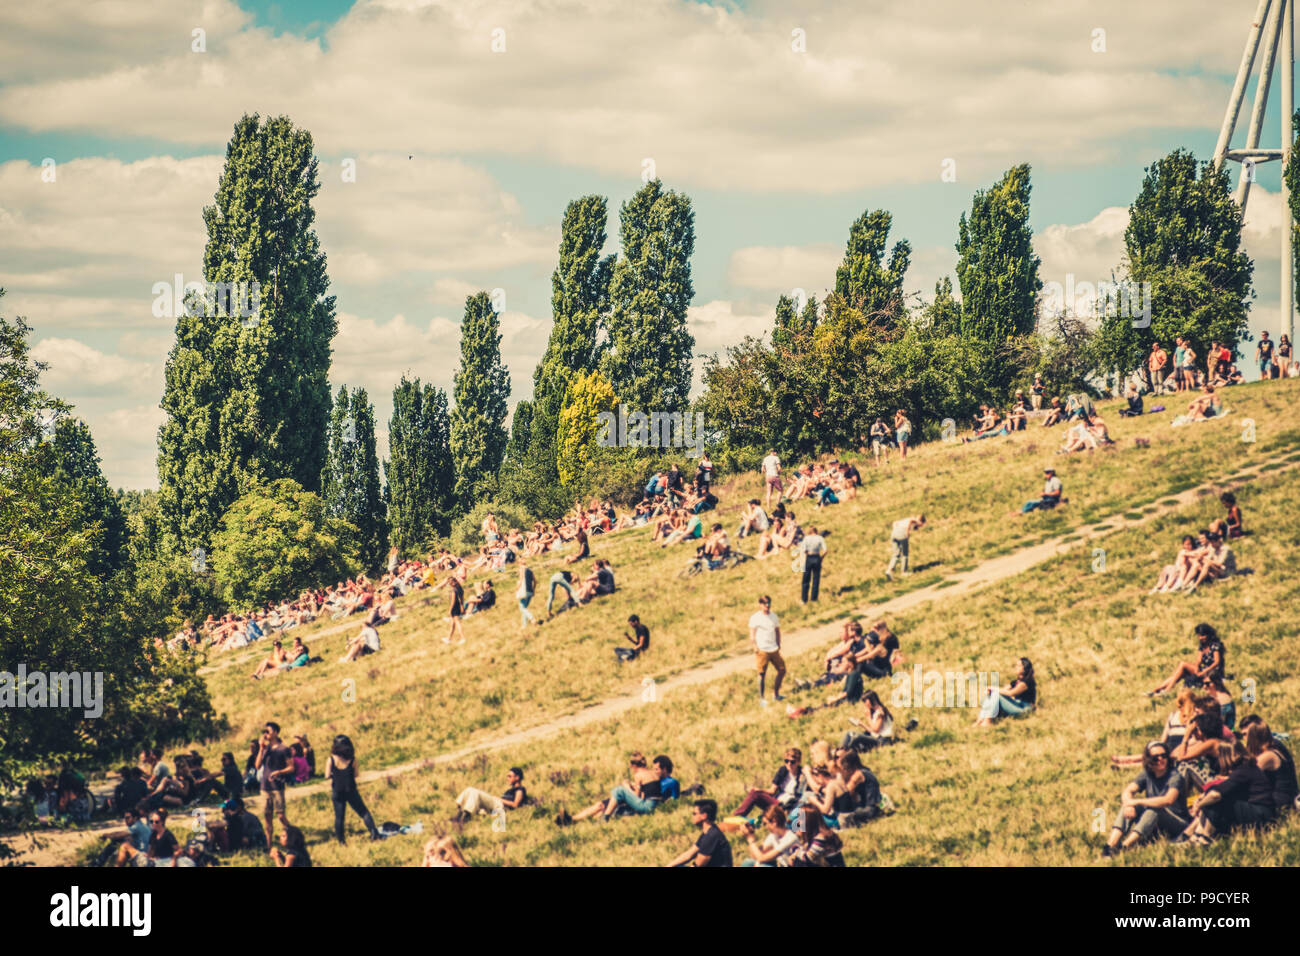 Berlin City summer concept - blurry image of people in crowded Park (Mauerpark) on a sunny summer  day - Stock Photo